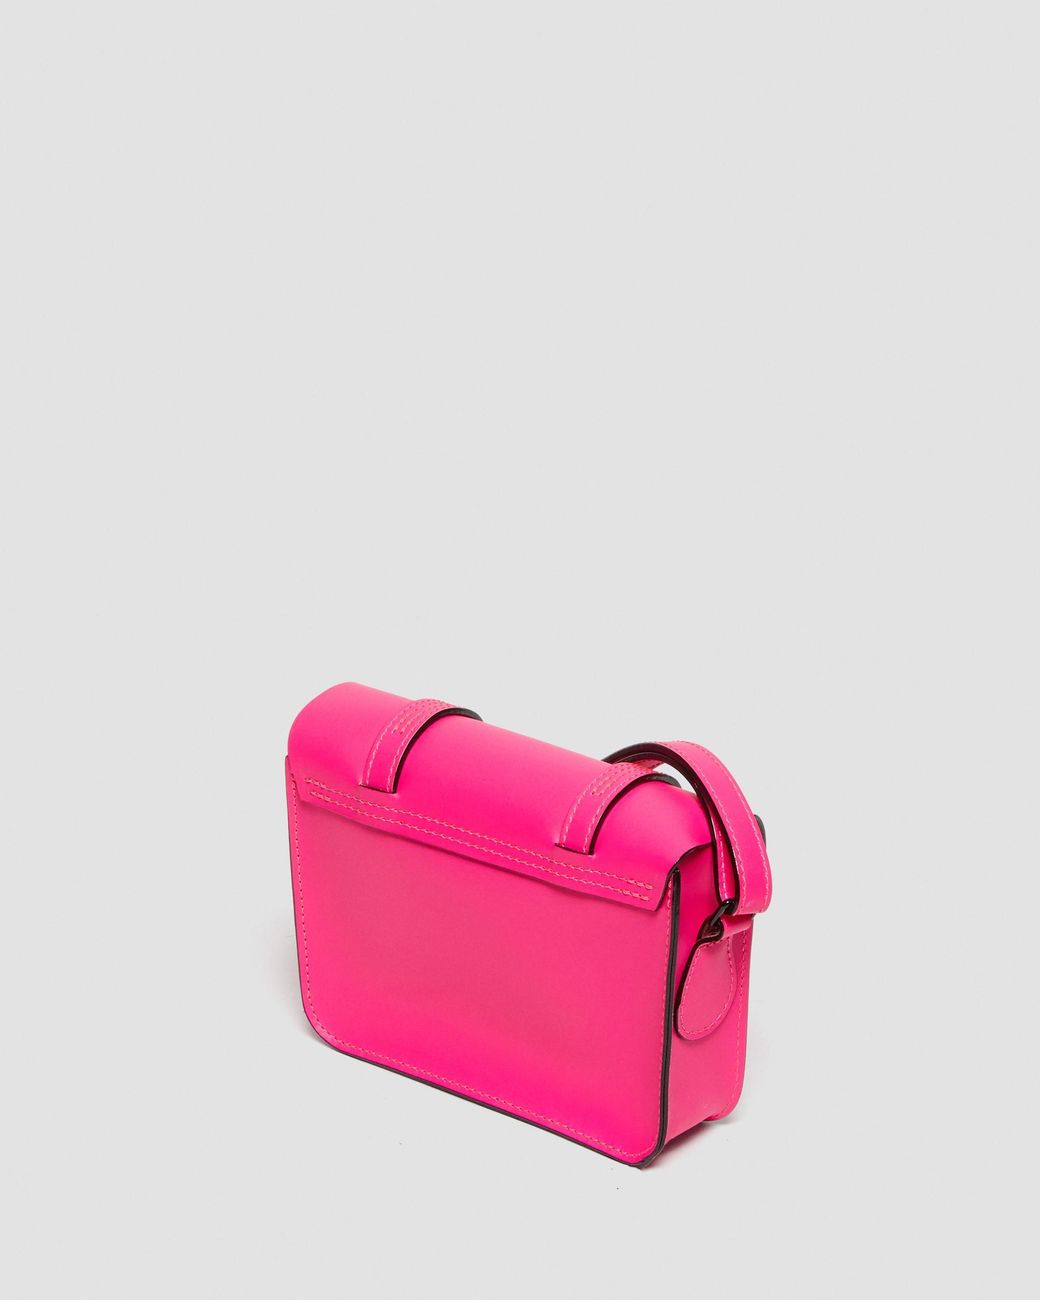 Dr. Martens 7 Inch Leather Crossbody Bag in Pink | Lyst